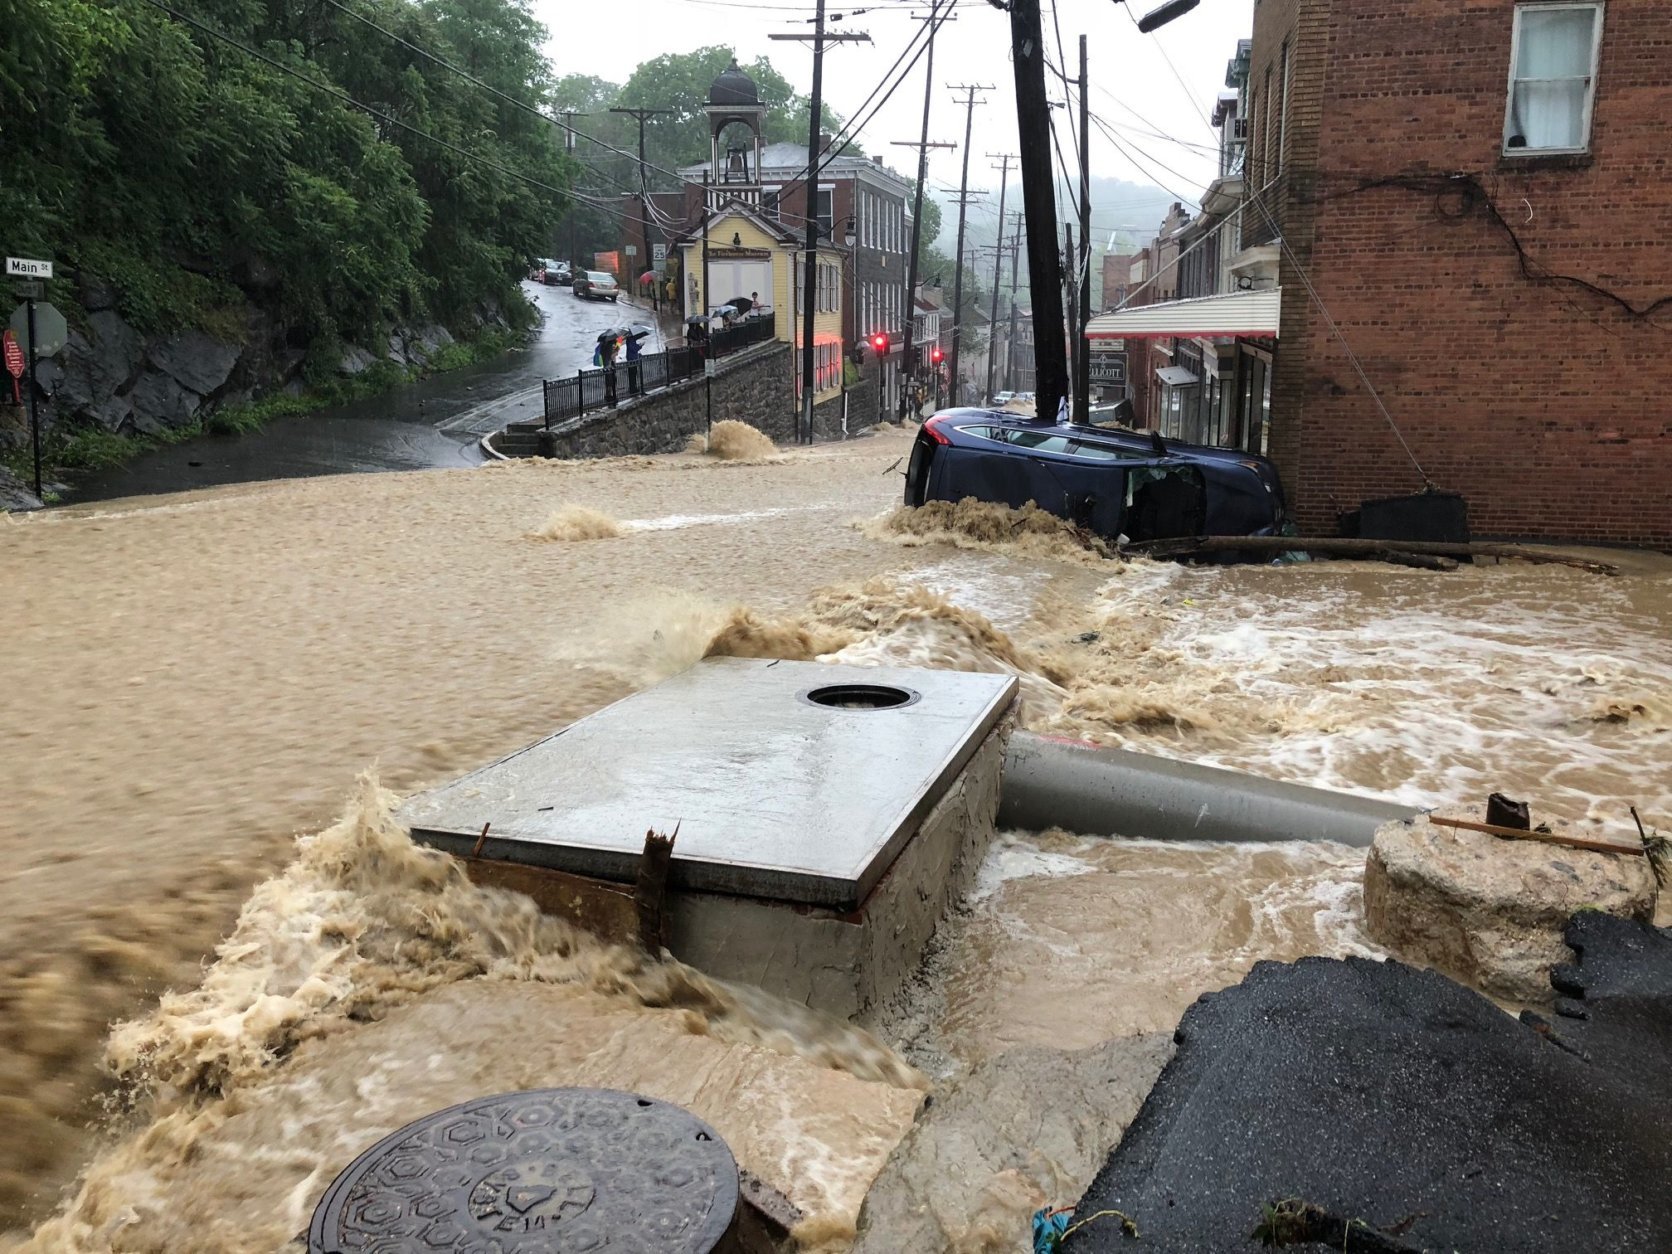 Flooding overtakes Main Street in Ellicott City, Maryland, after heavy rains and storms on Sunday, May 27, 2018. (WTOP/Dave Dildine)